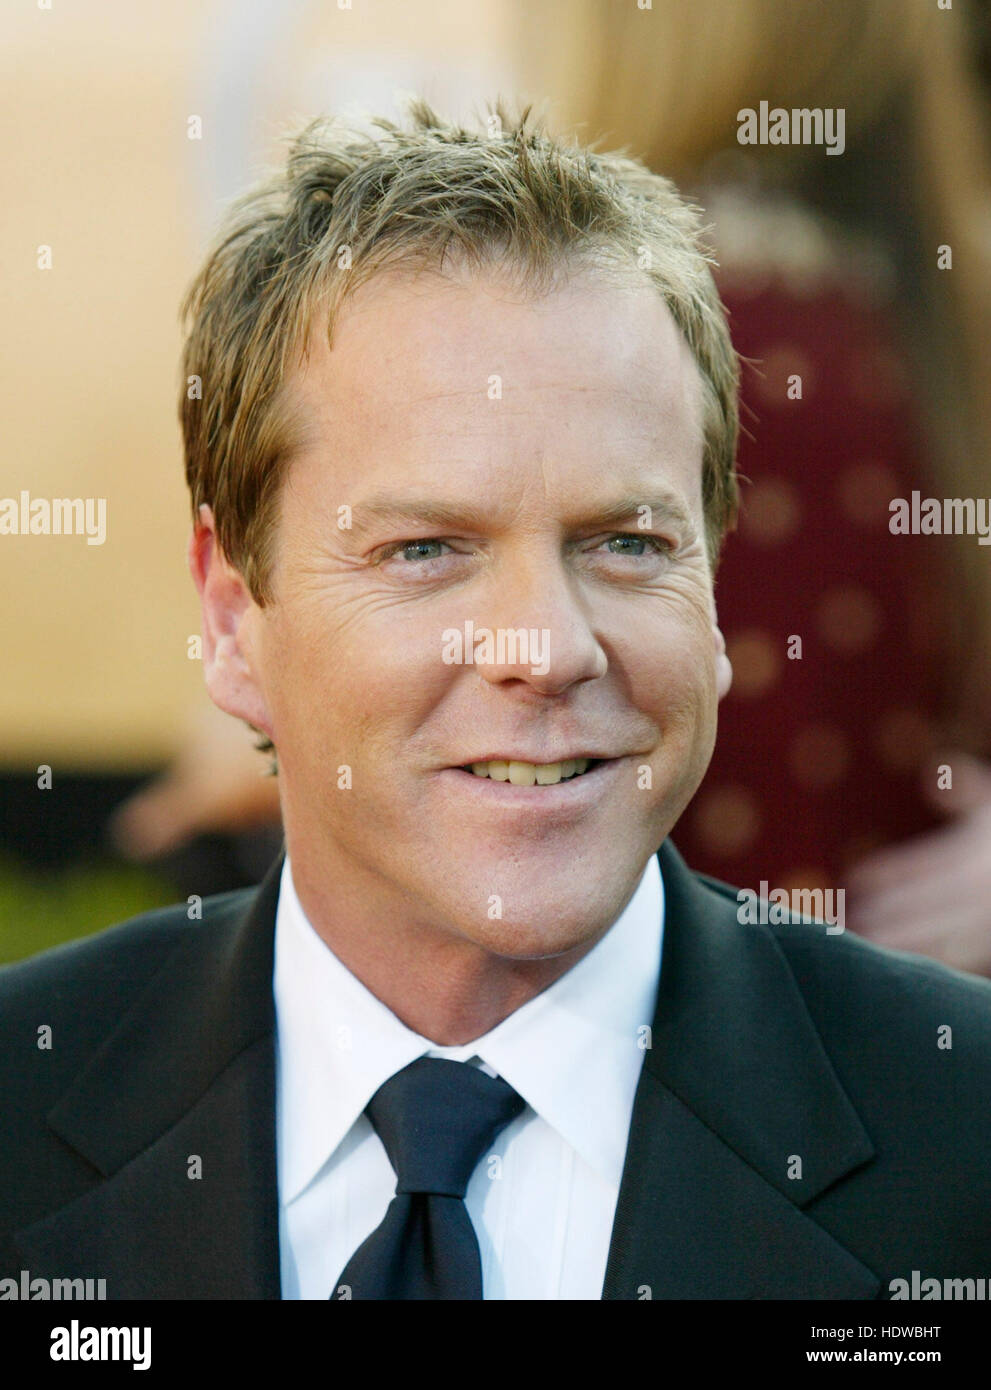 Actor Kiefer Sutherland arrives during the 11th annual Screen Actors Guild awards at the Shrine Auditorium in Los Angeles, California on February 5, 2005. Photo credit: Francis Specker Stock Photo